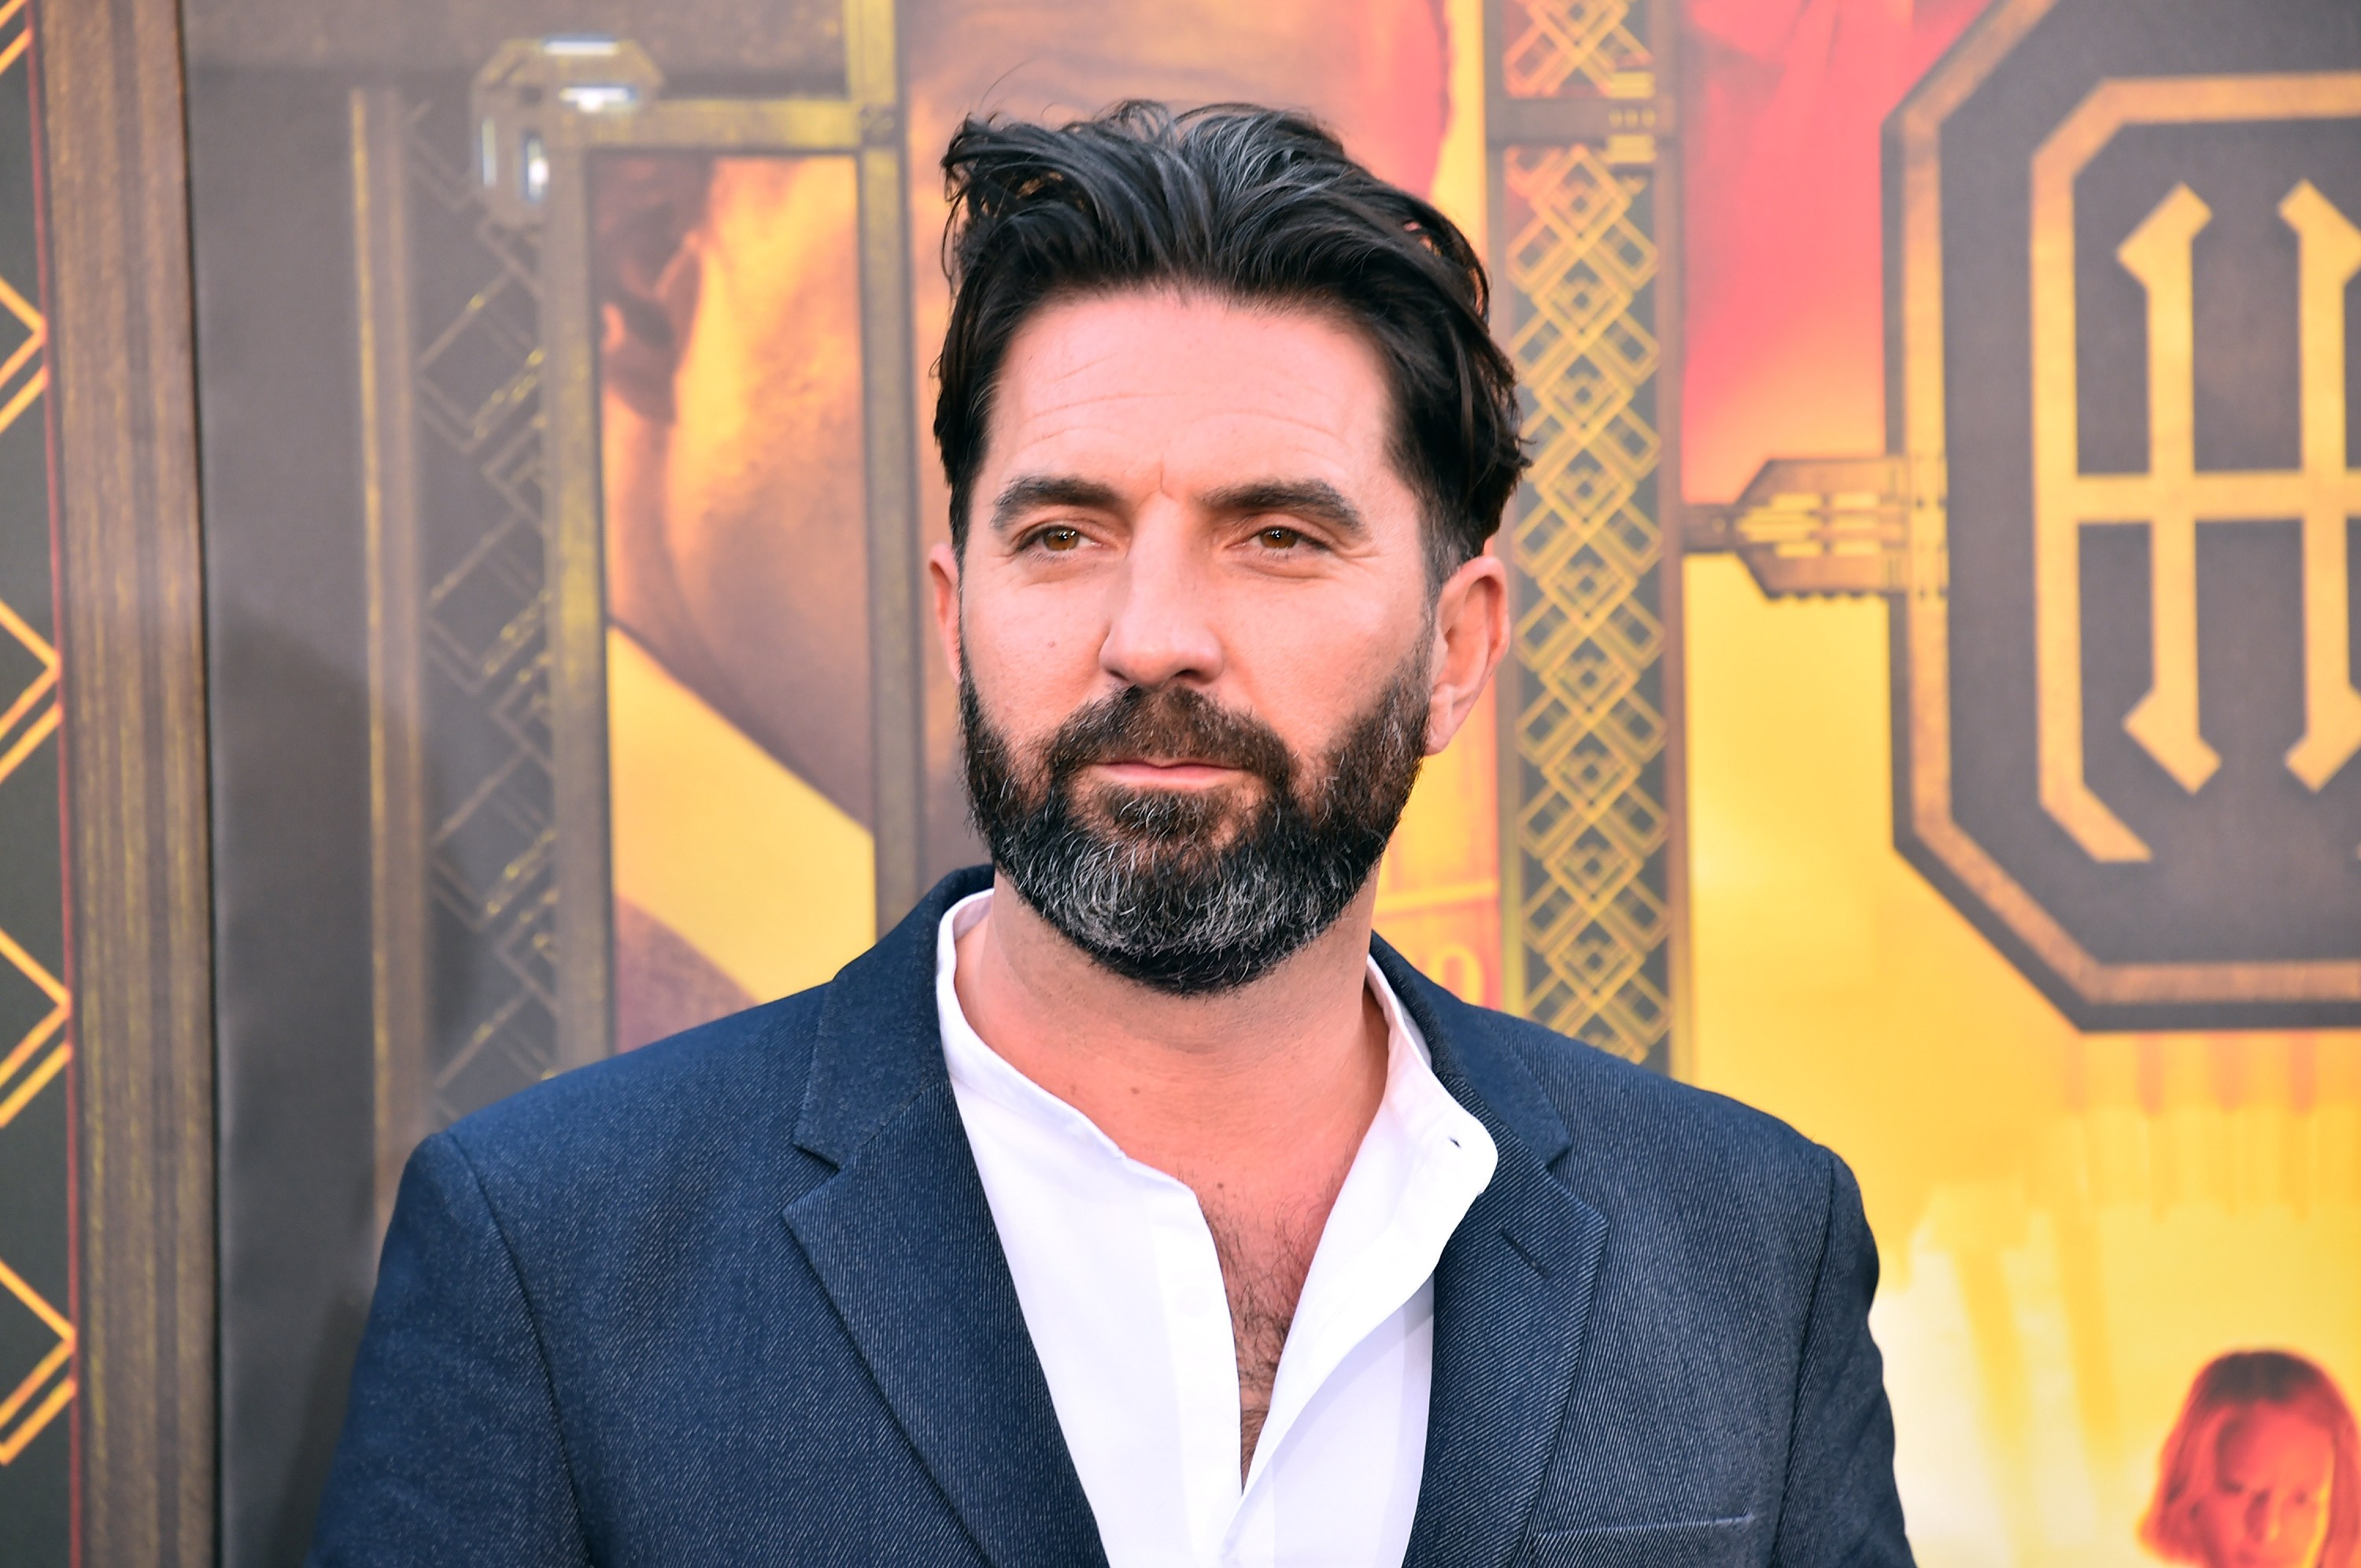 WESTWOOD, CA - MAY 19:  Director Drew Pearce attends the premiere of Global Road Entertainment's 'Hotel Artemis' at Regency Village Theatre on May 19, 2018 in Westwood, California.  (Photo by Alberto E. Rodriguez/Getty Images)